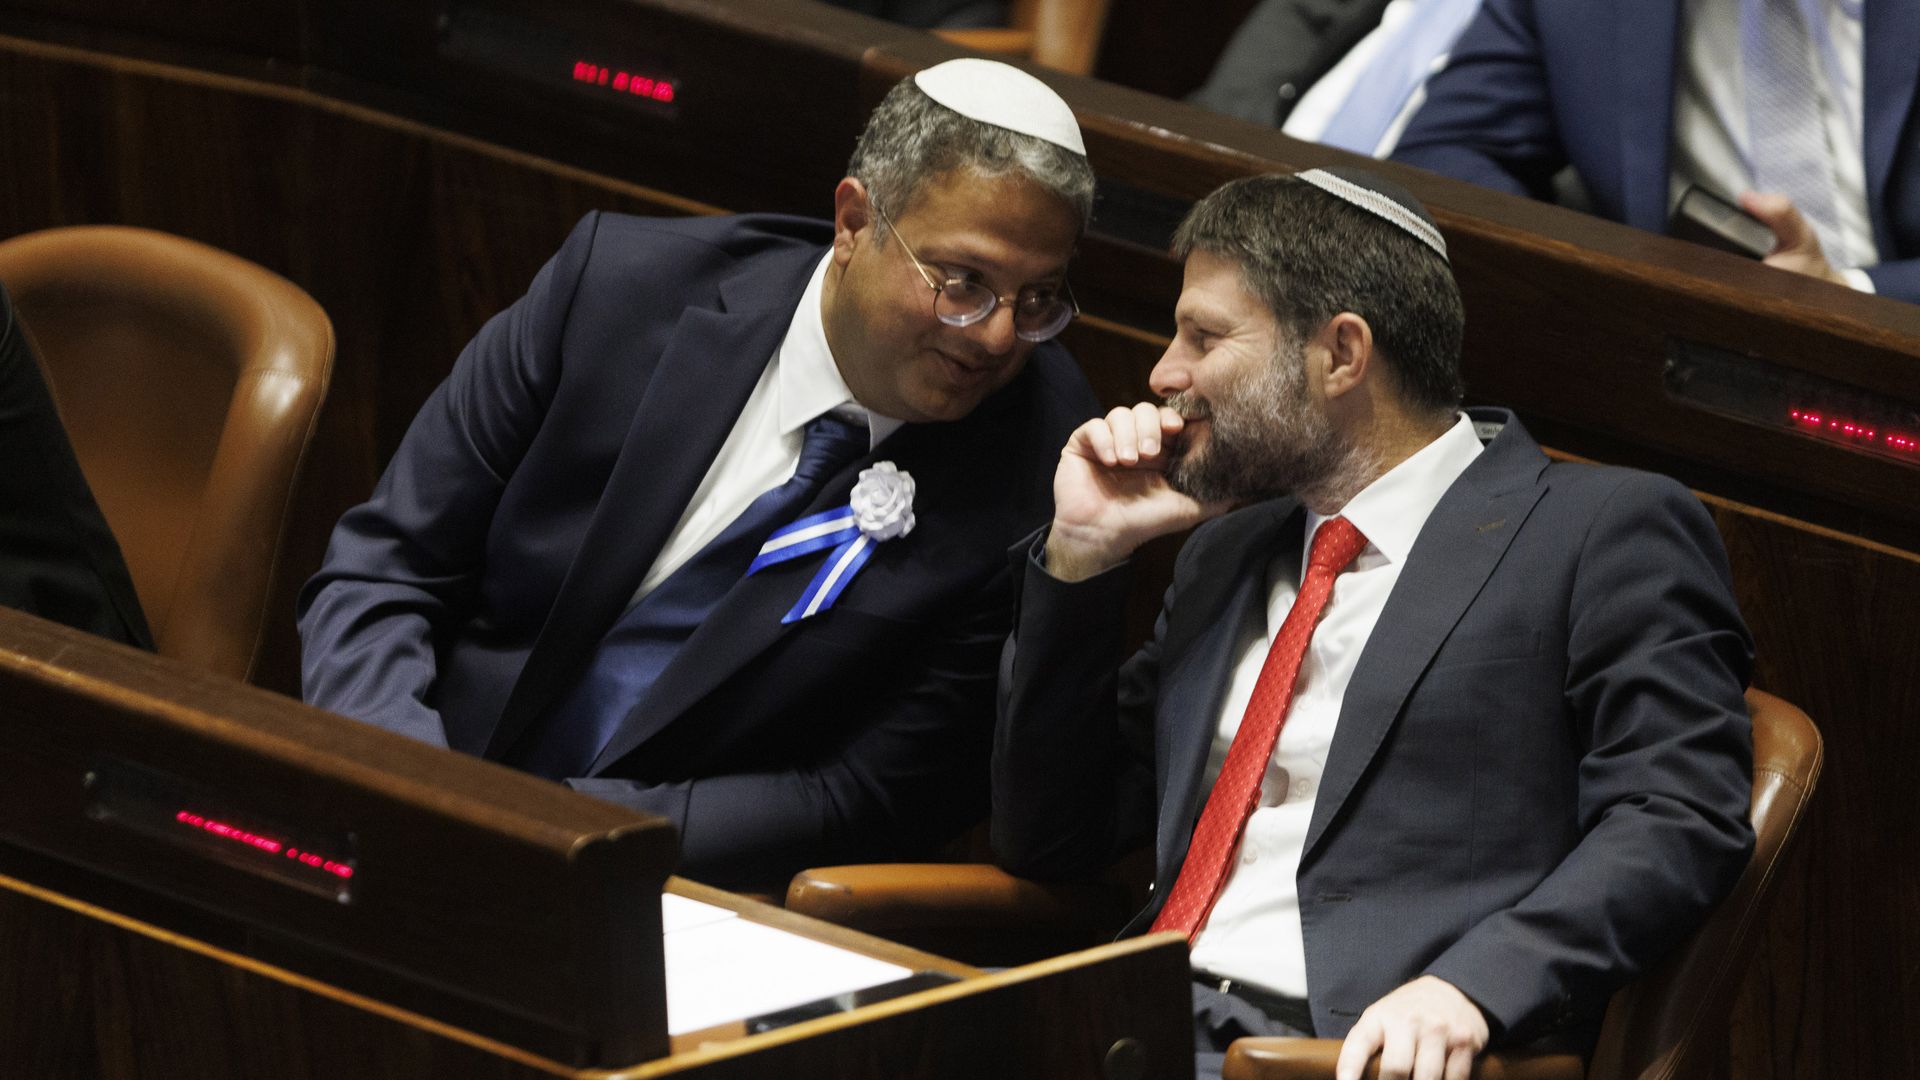 Itmar Ben Gvir and Bezalel Smotrich talk in the Knesset on Nov. 15. Photo: Kobi Wolf/Bloomberg via Getty Images